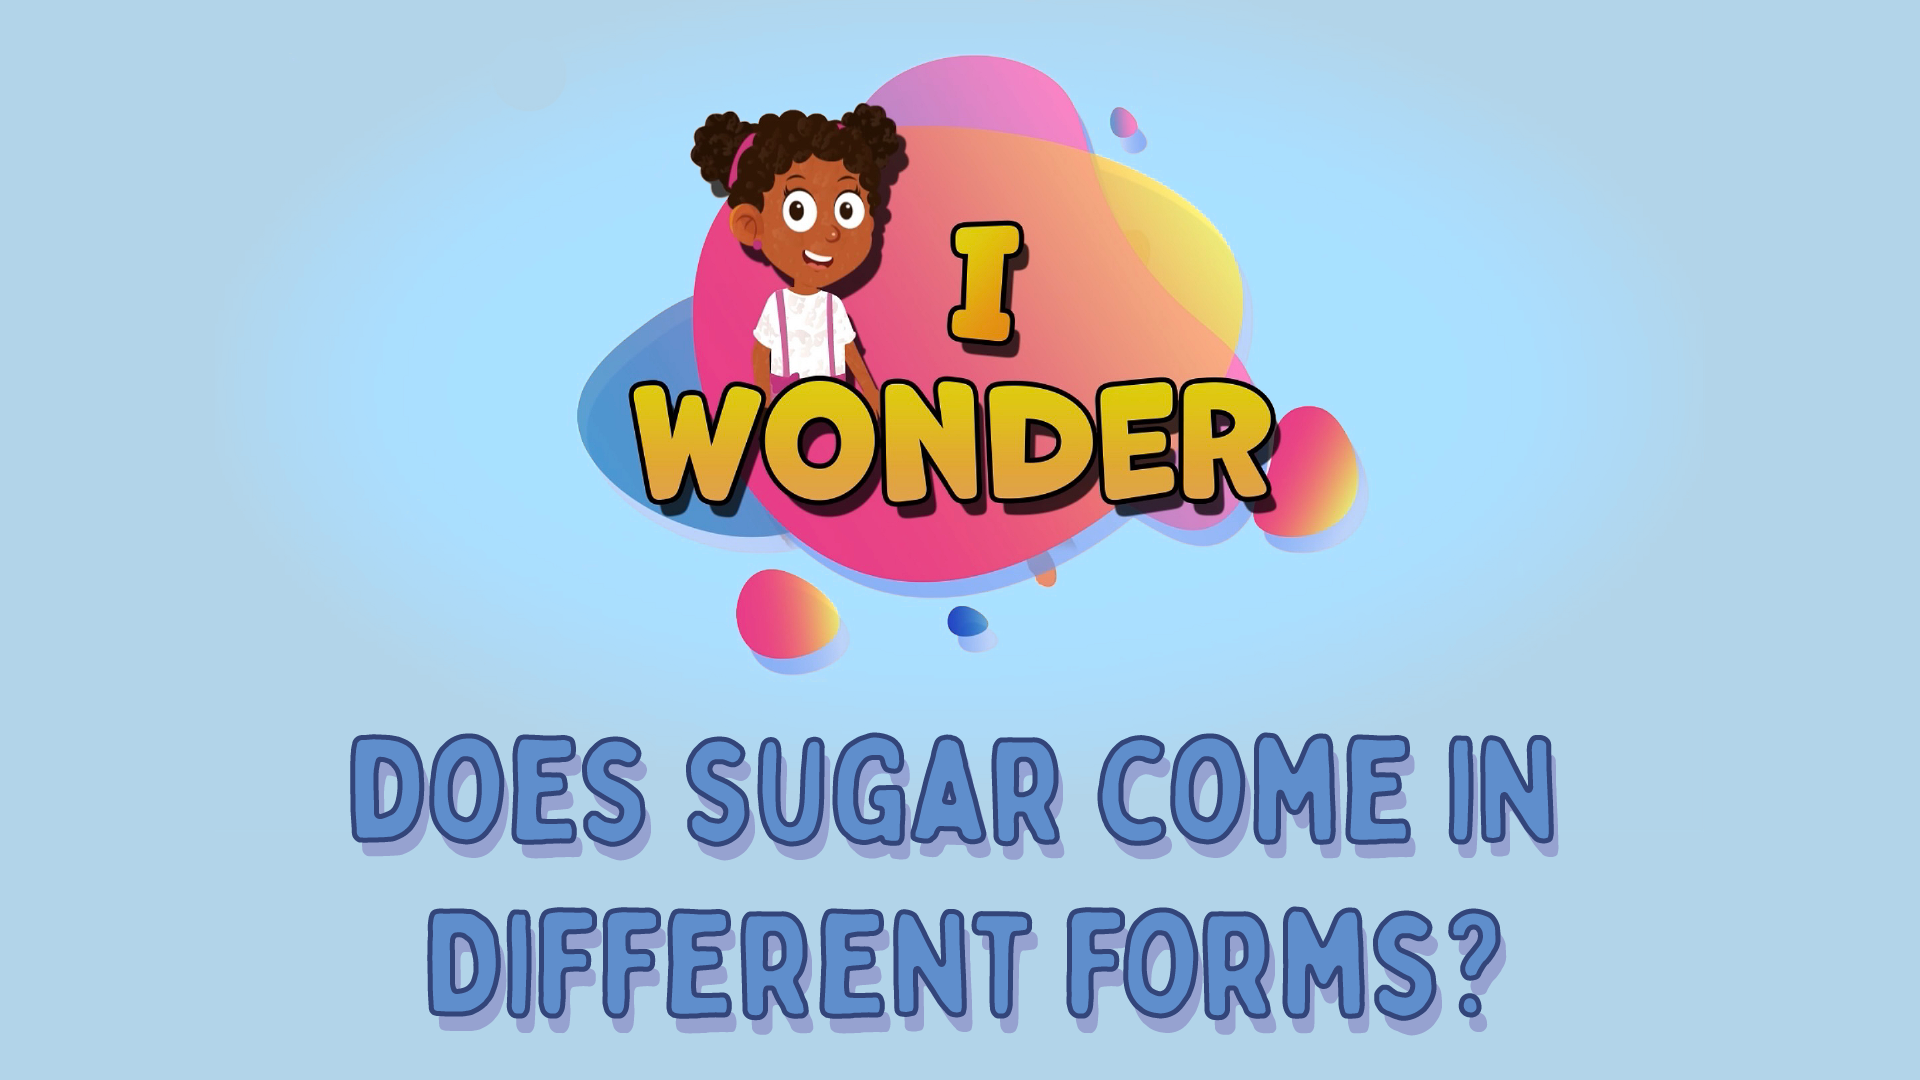 Does Sugar Come In Different Forms?